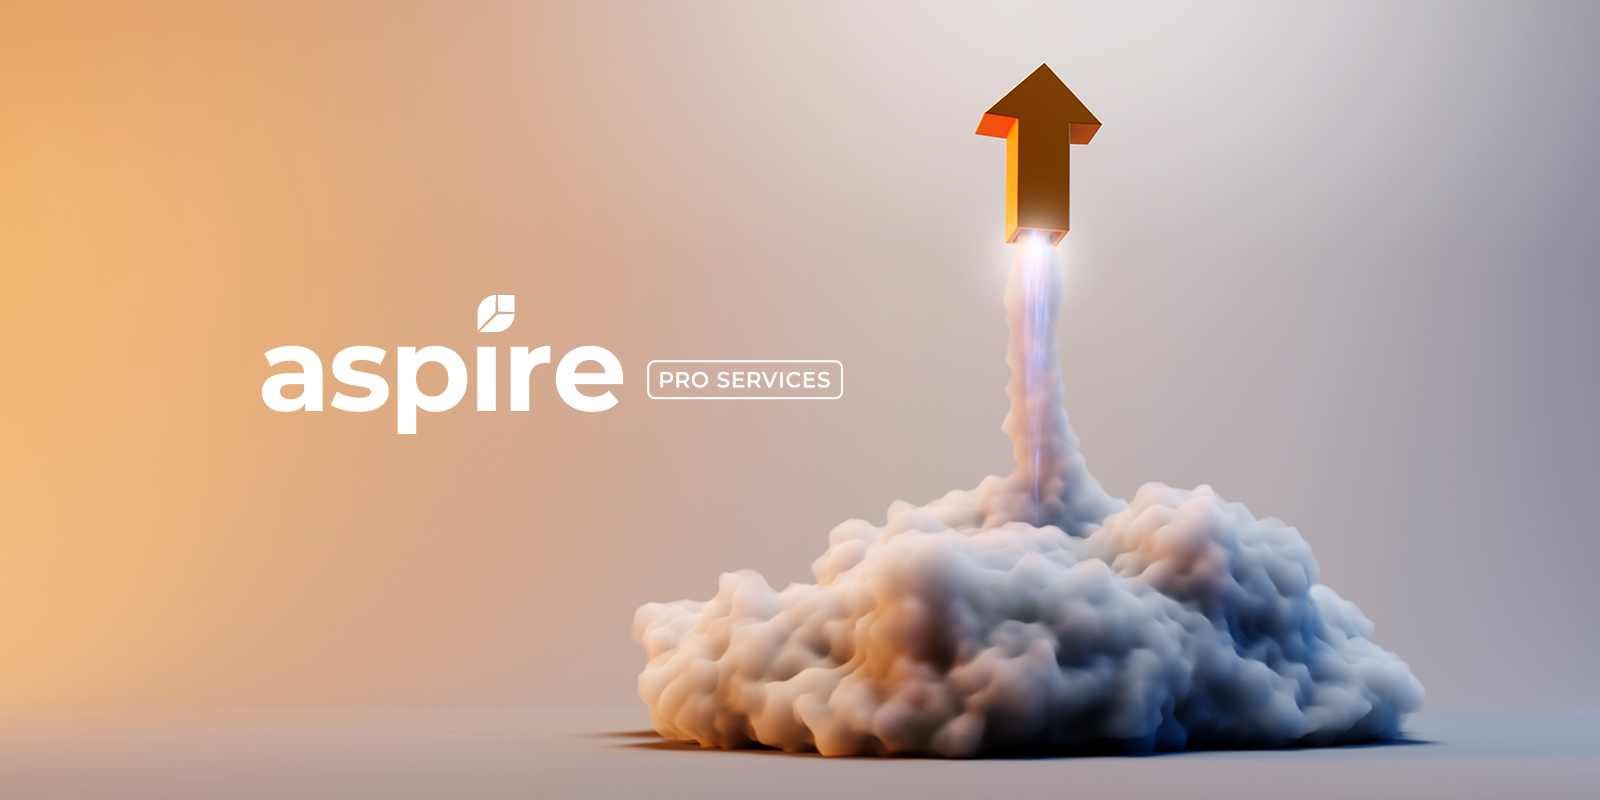 Accelerate your business's growth with Aspire Pro Services